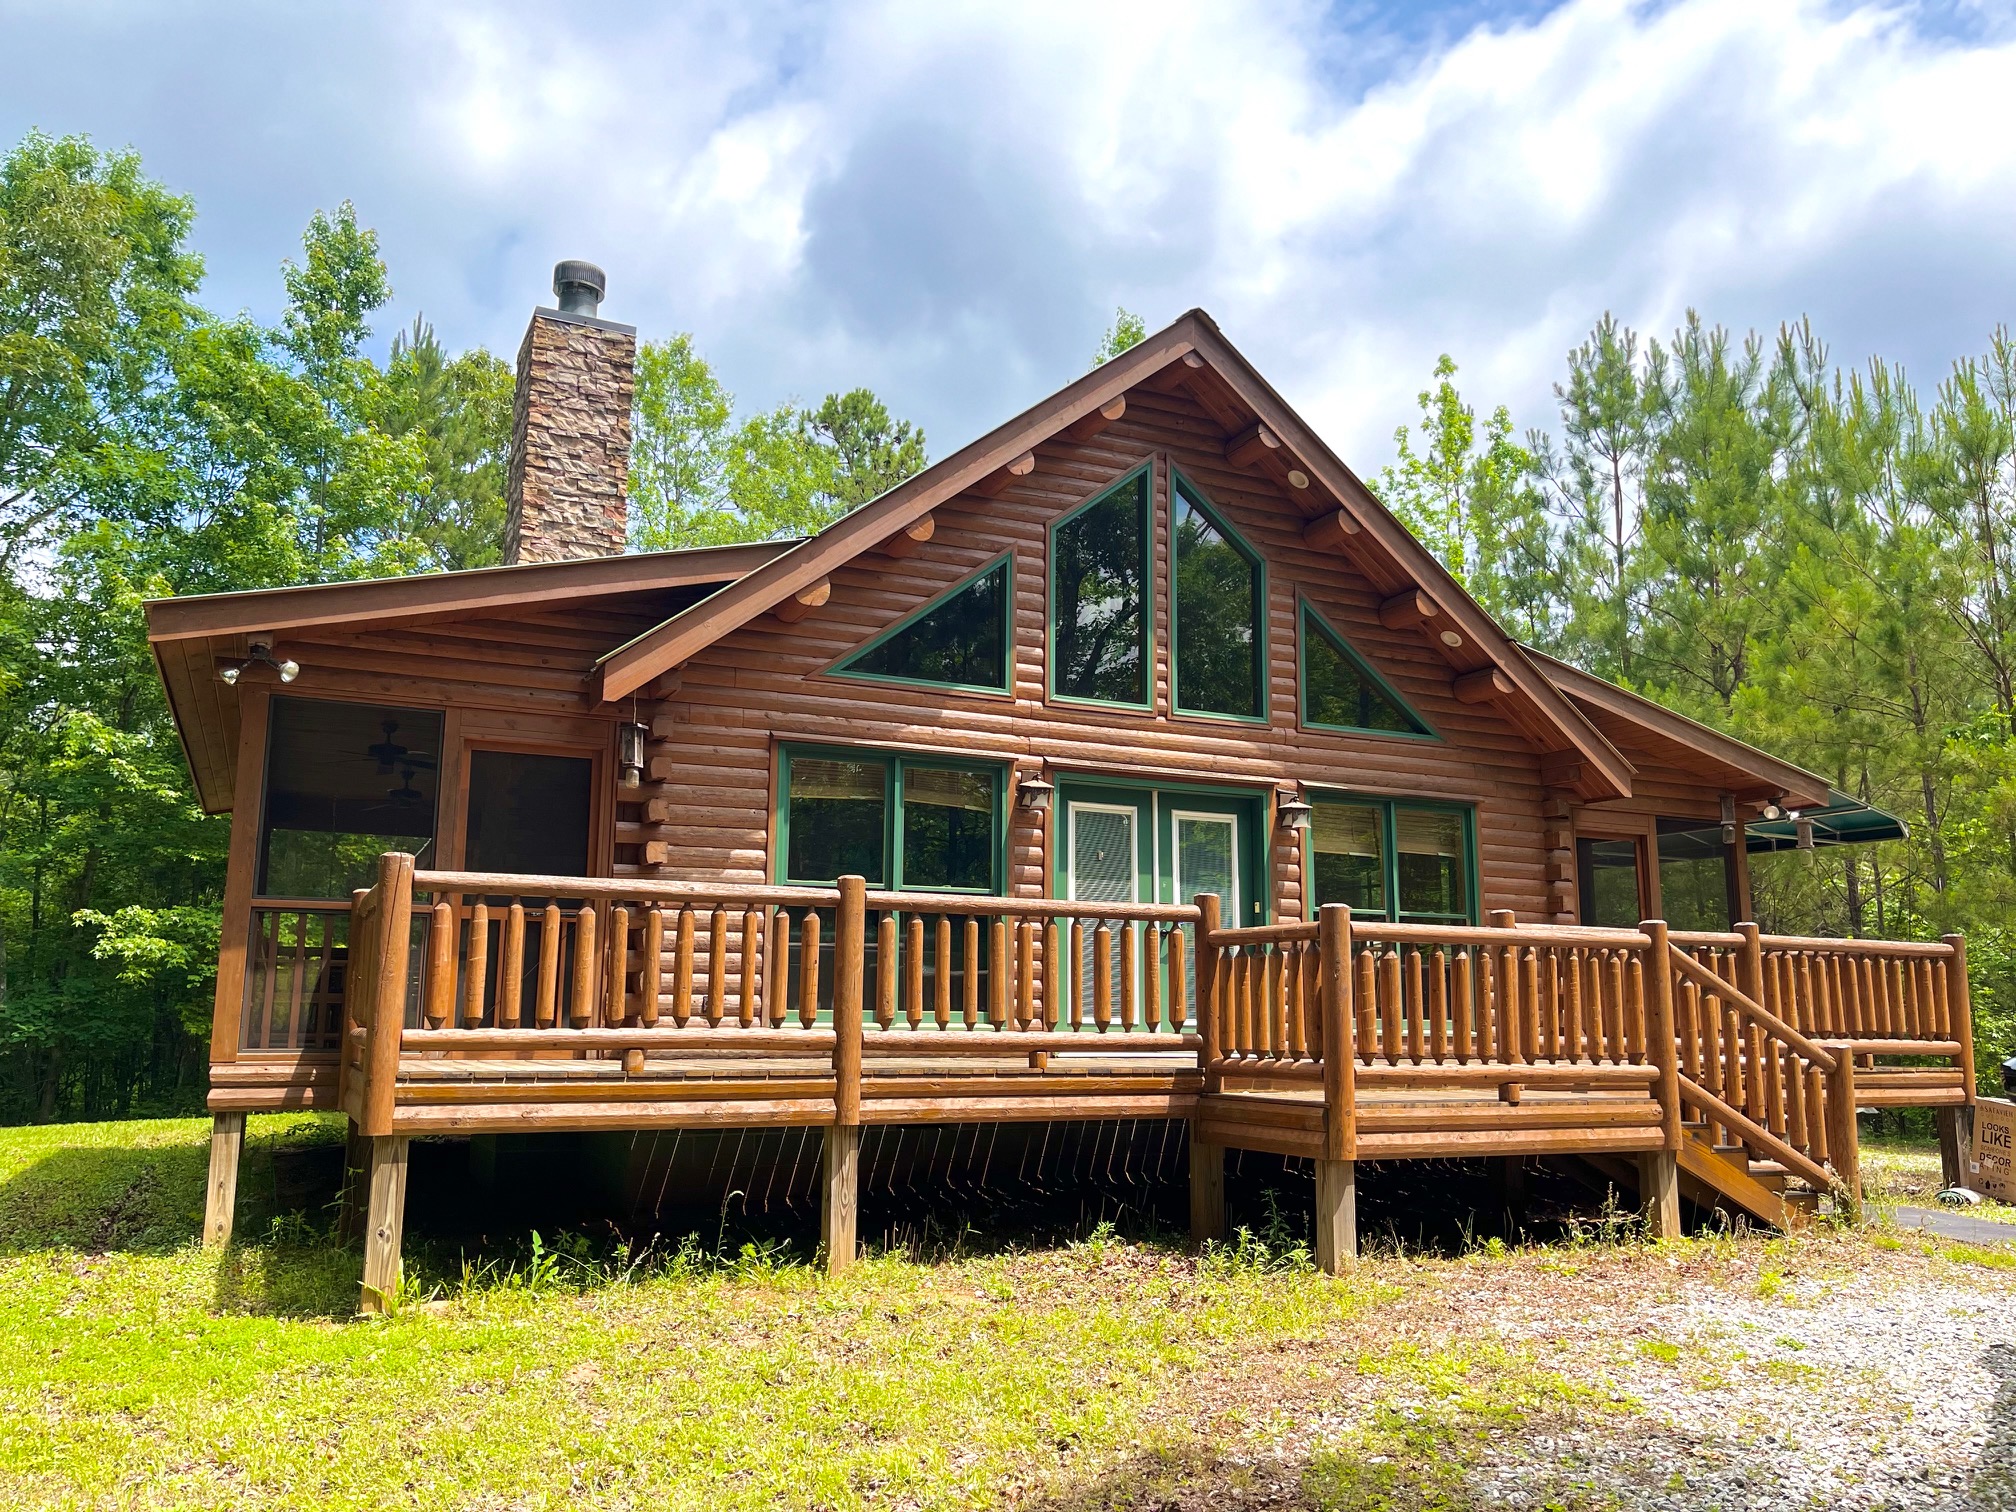 Couples from Tampa, FL Flock to Pine Mountain, GA for Premier Vacation Experience at "The 22" Cabin